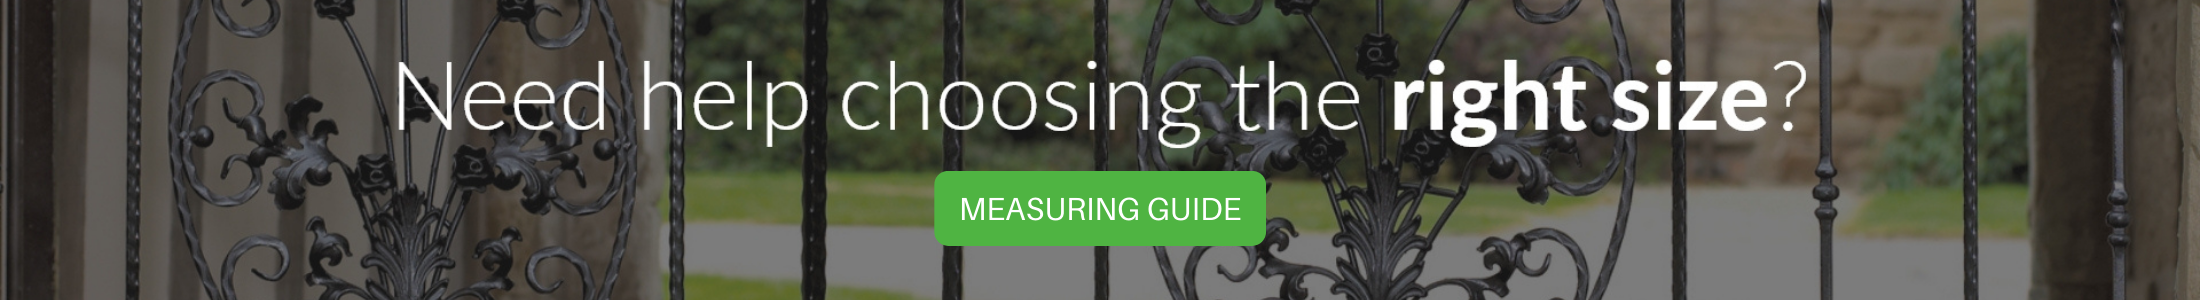 Refer to the measuring guide for help with sizes